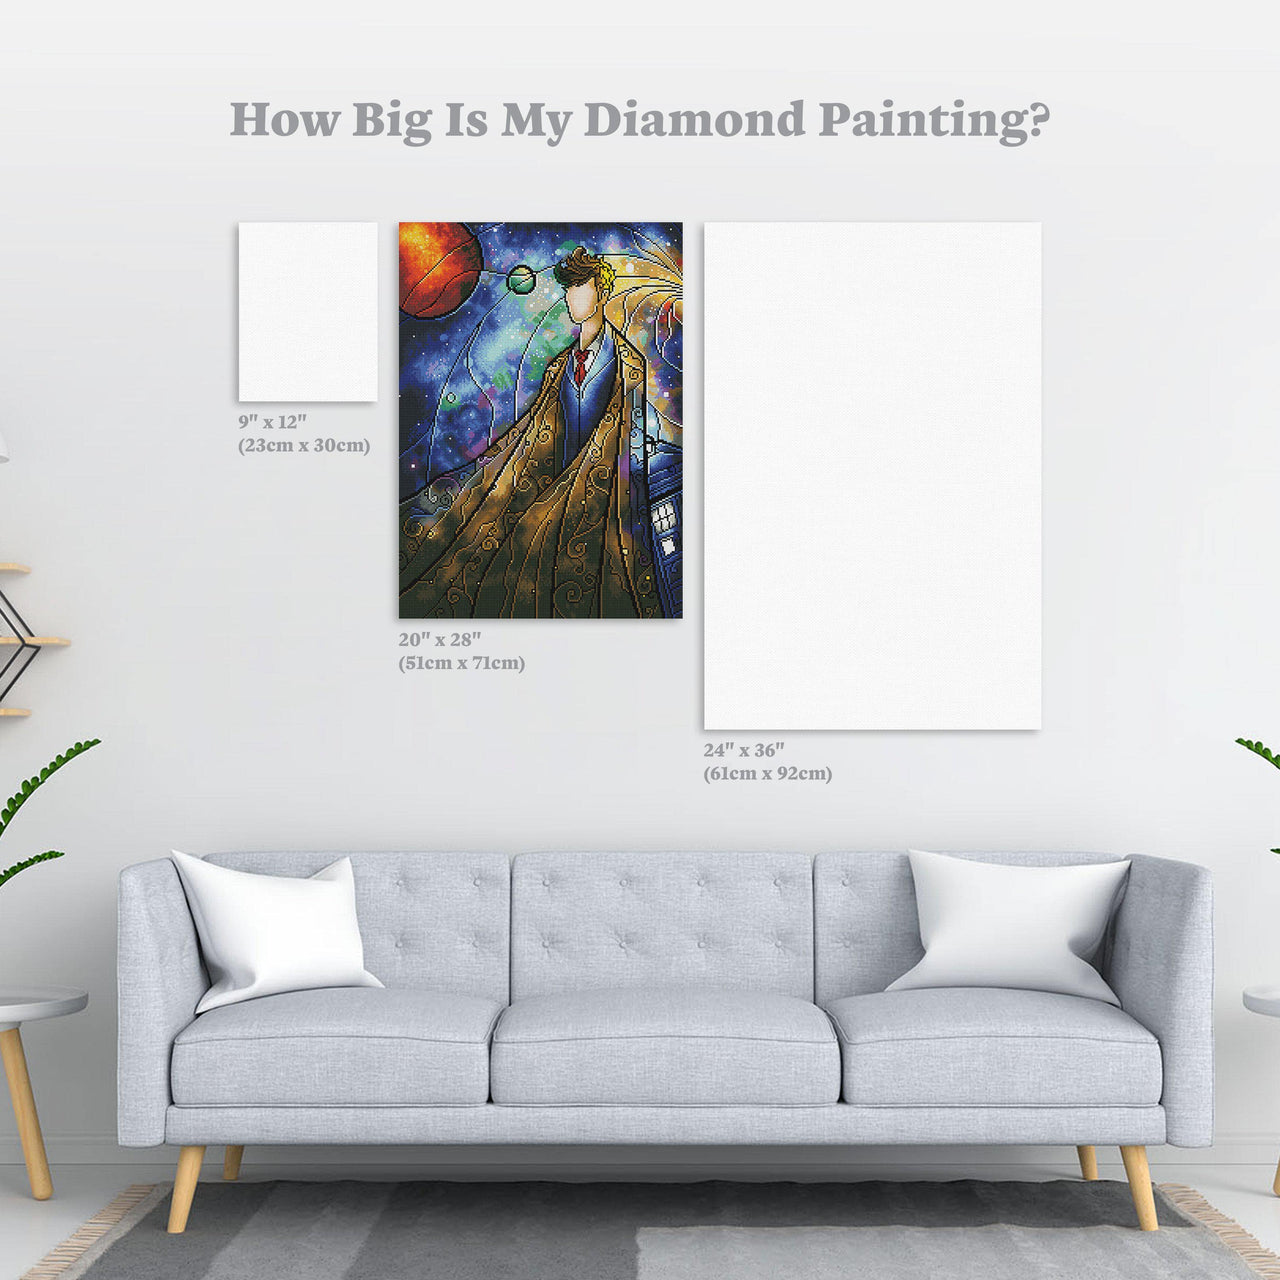 Diamond Painting The Tenth 20" x 28″ (51cm x 71cm) / Round with 45 Colors including 2 ABs